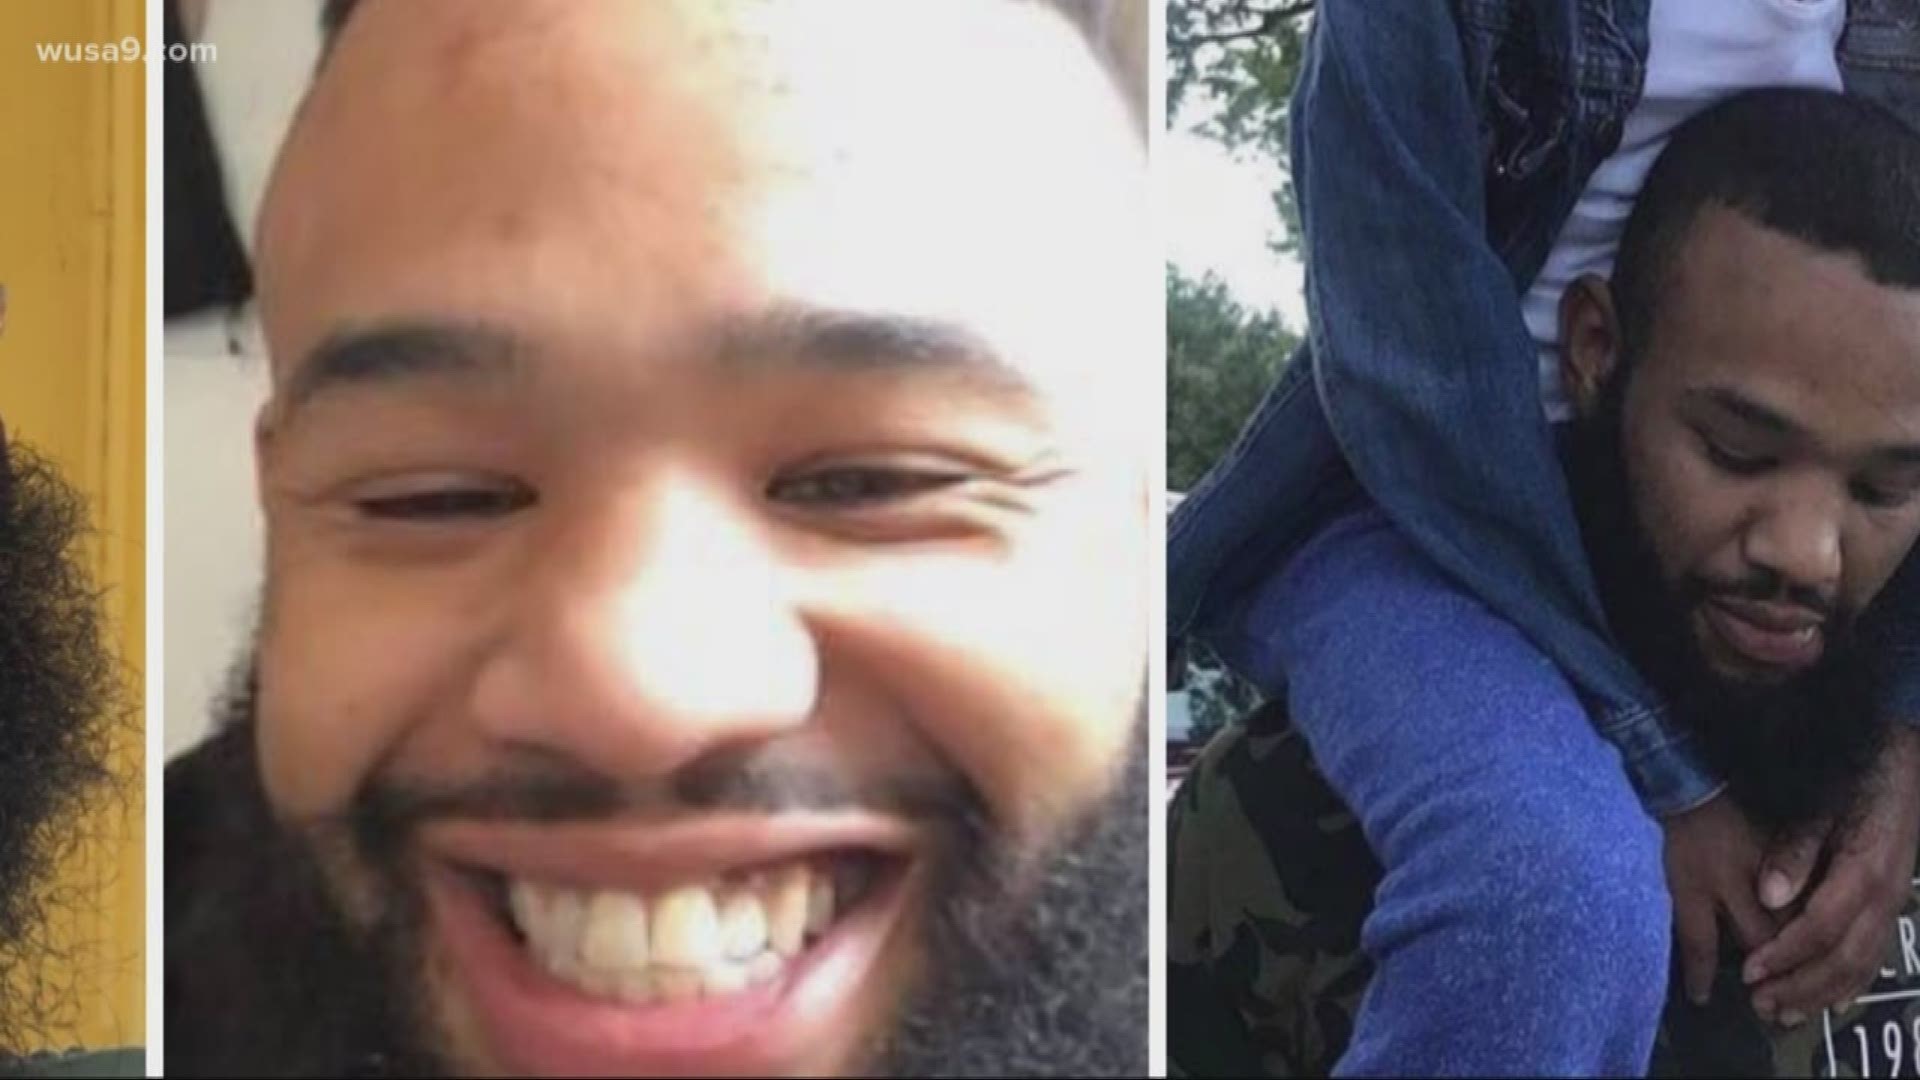 Christopher Turner, 27 and a father of two, had been missing from the Hagerstown, Md., area for 10 days, police said. He was found dead in West Virginia on Wednesday.